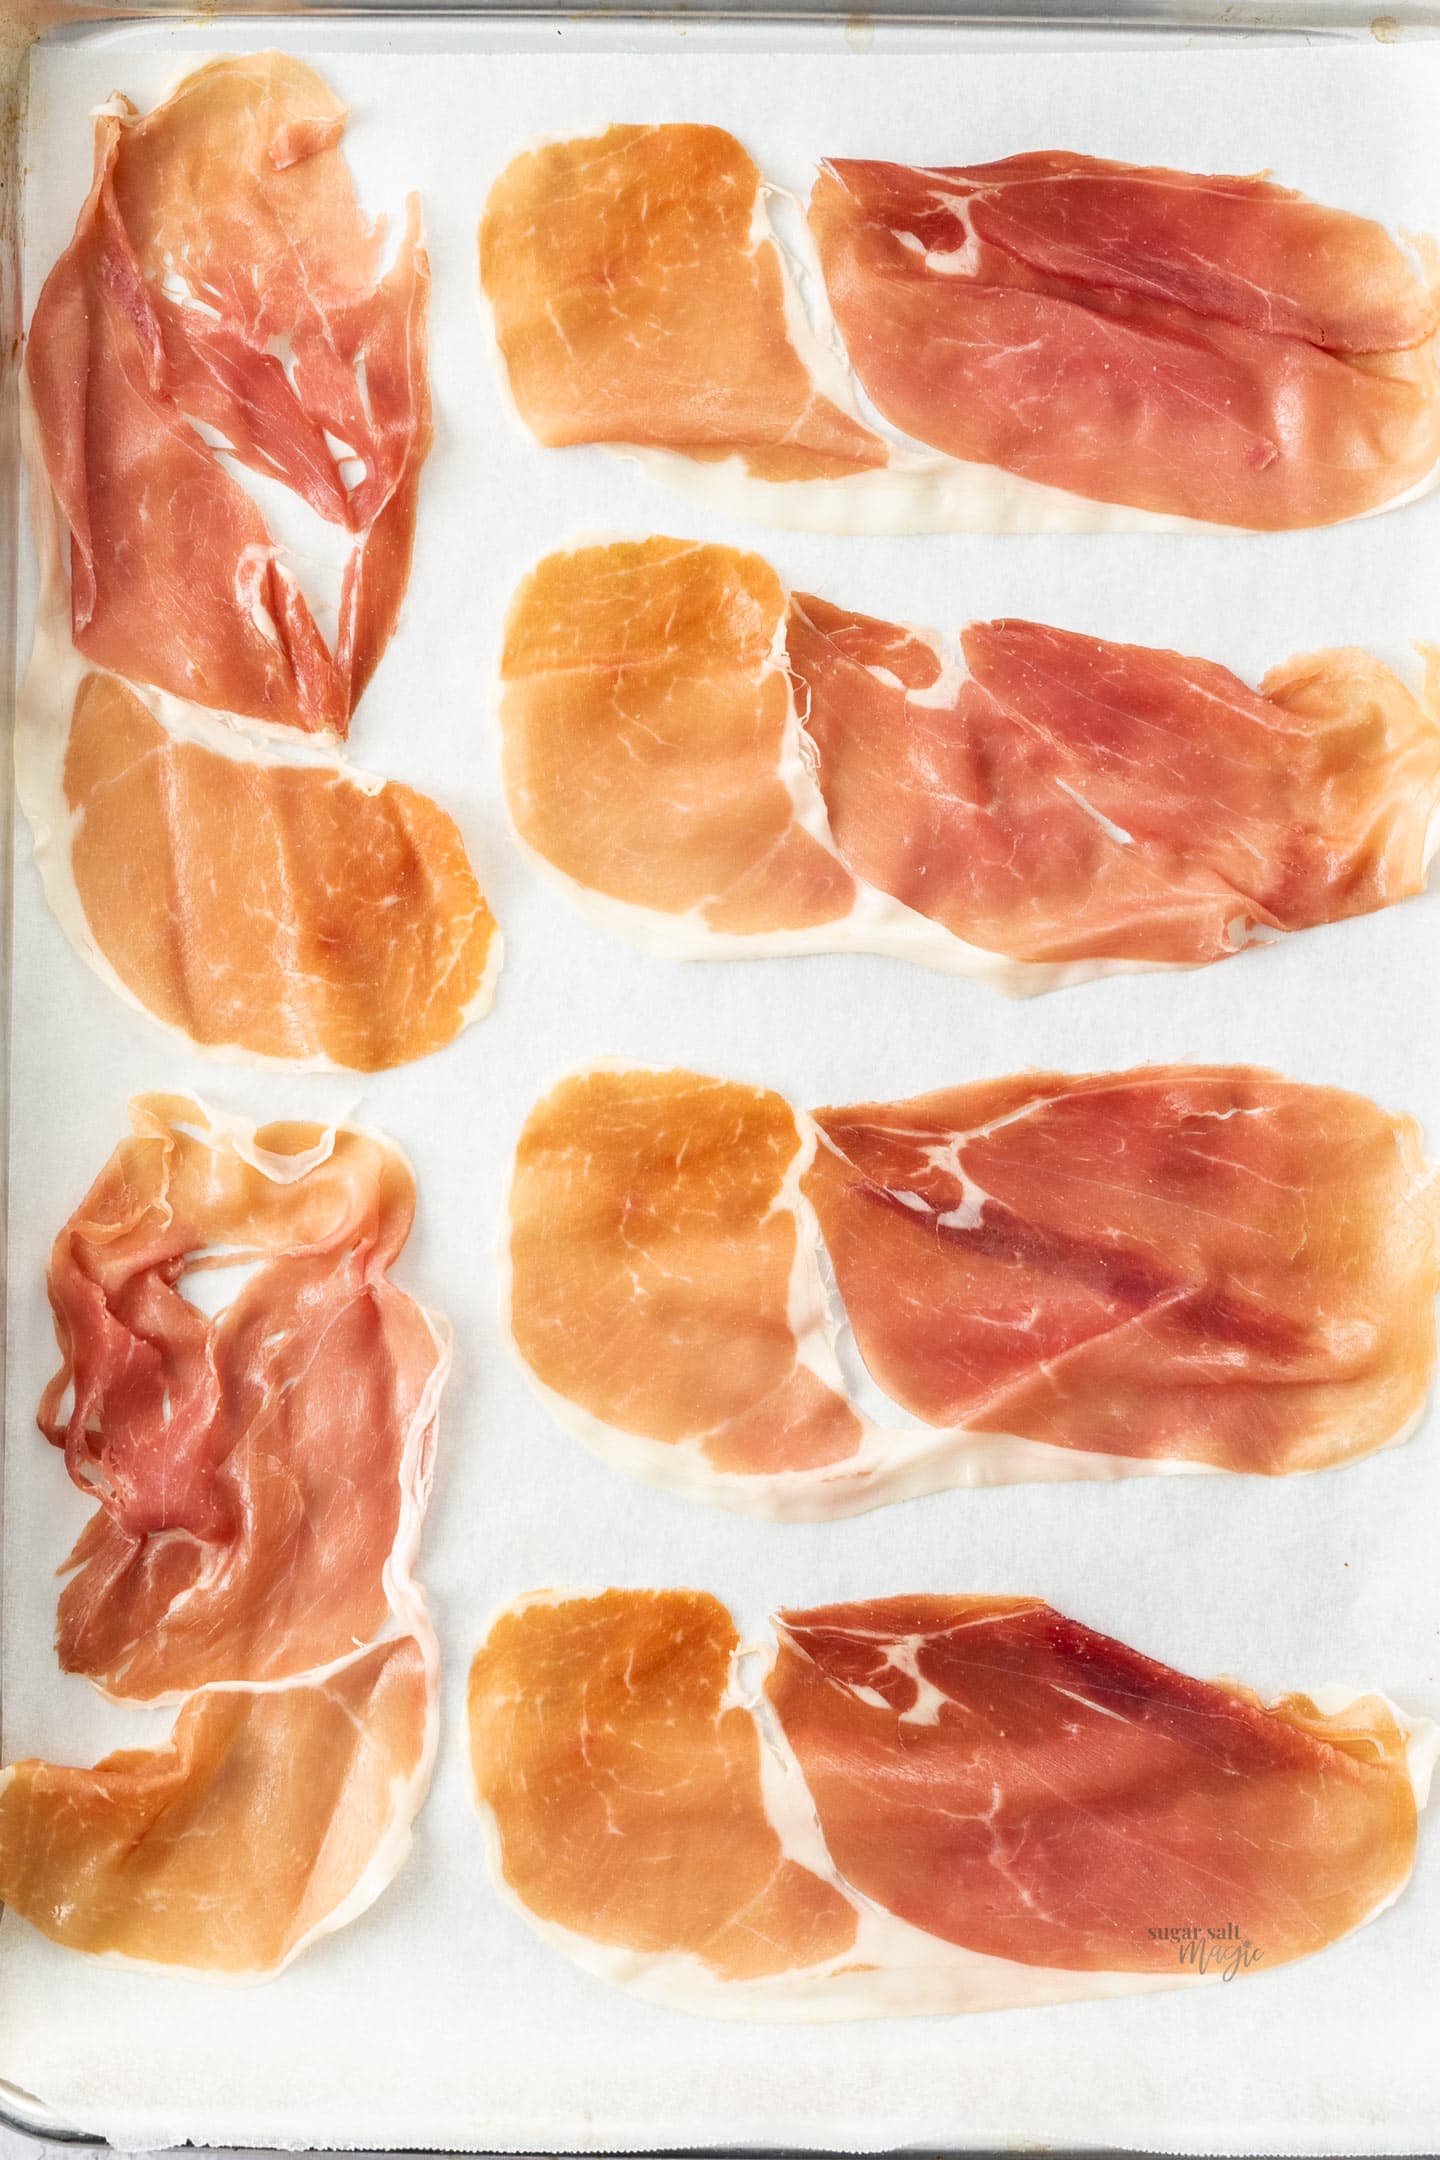 A baking tray with 6 slices of prosciutto laid flat.